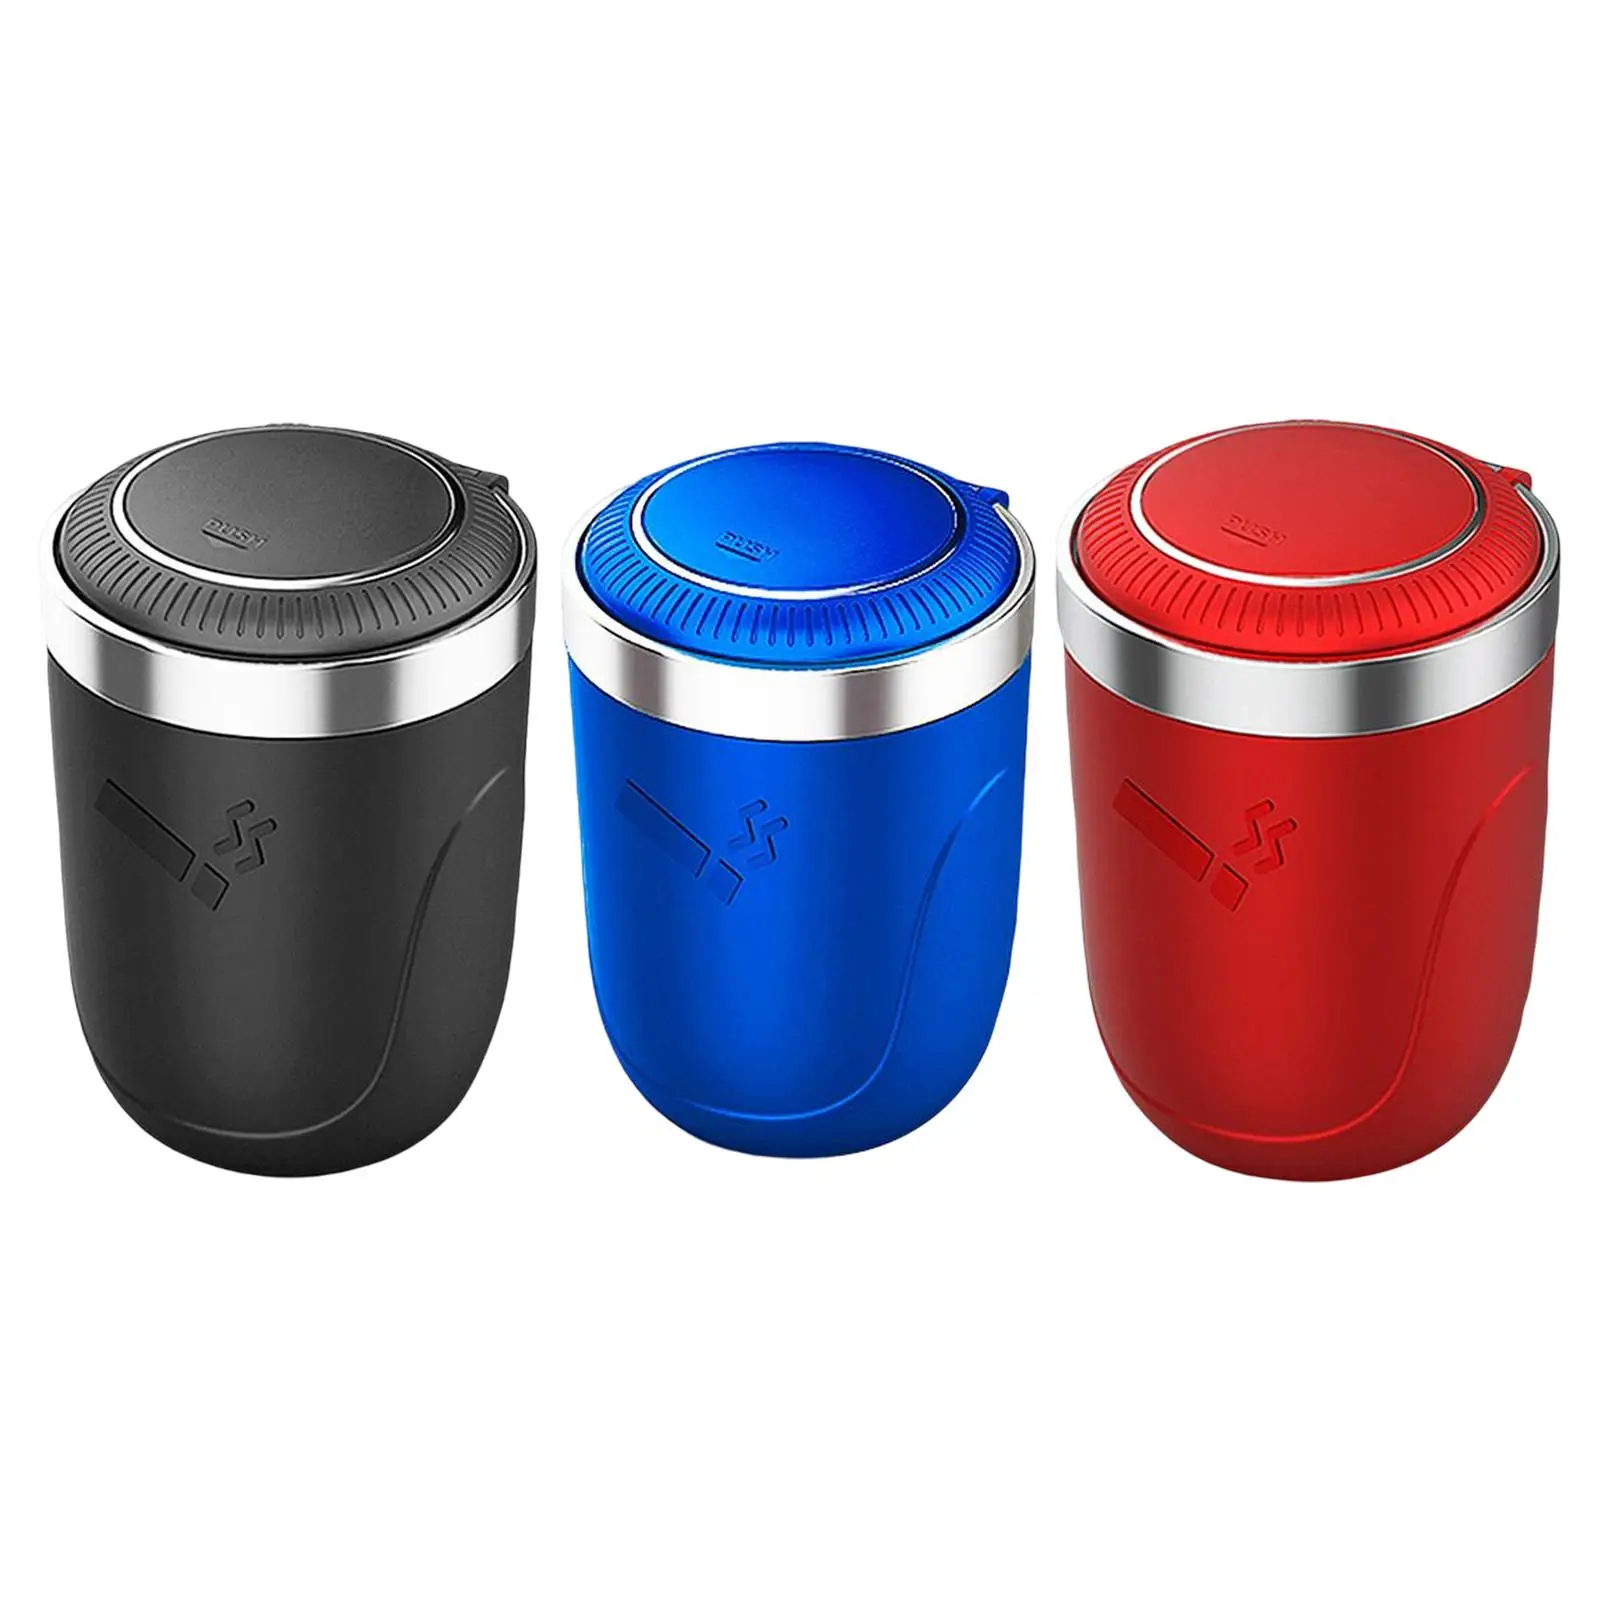 Car Ashtray with Lid Easy Clean up Cigar Ash Bucket Ashtray Container Fit for Travel